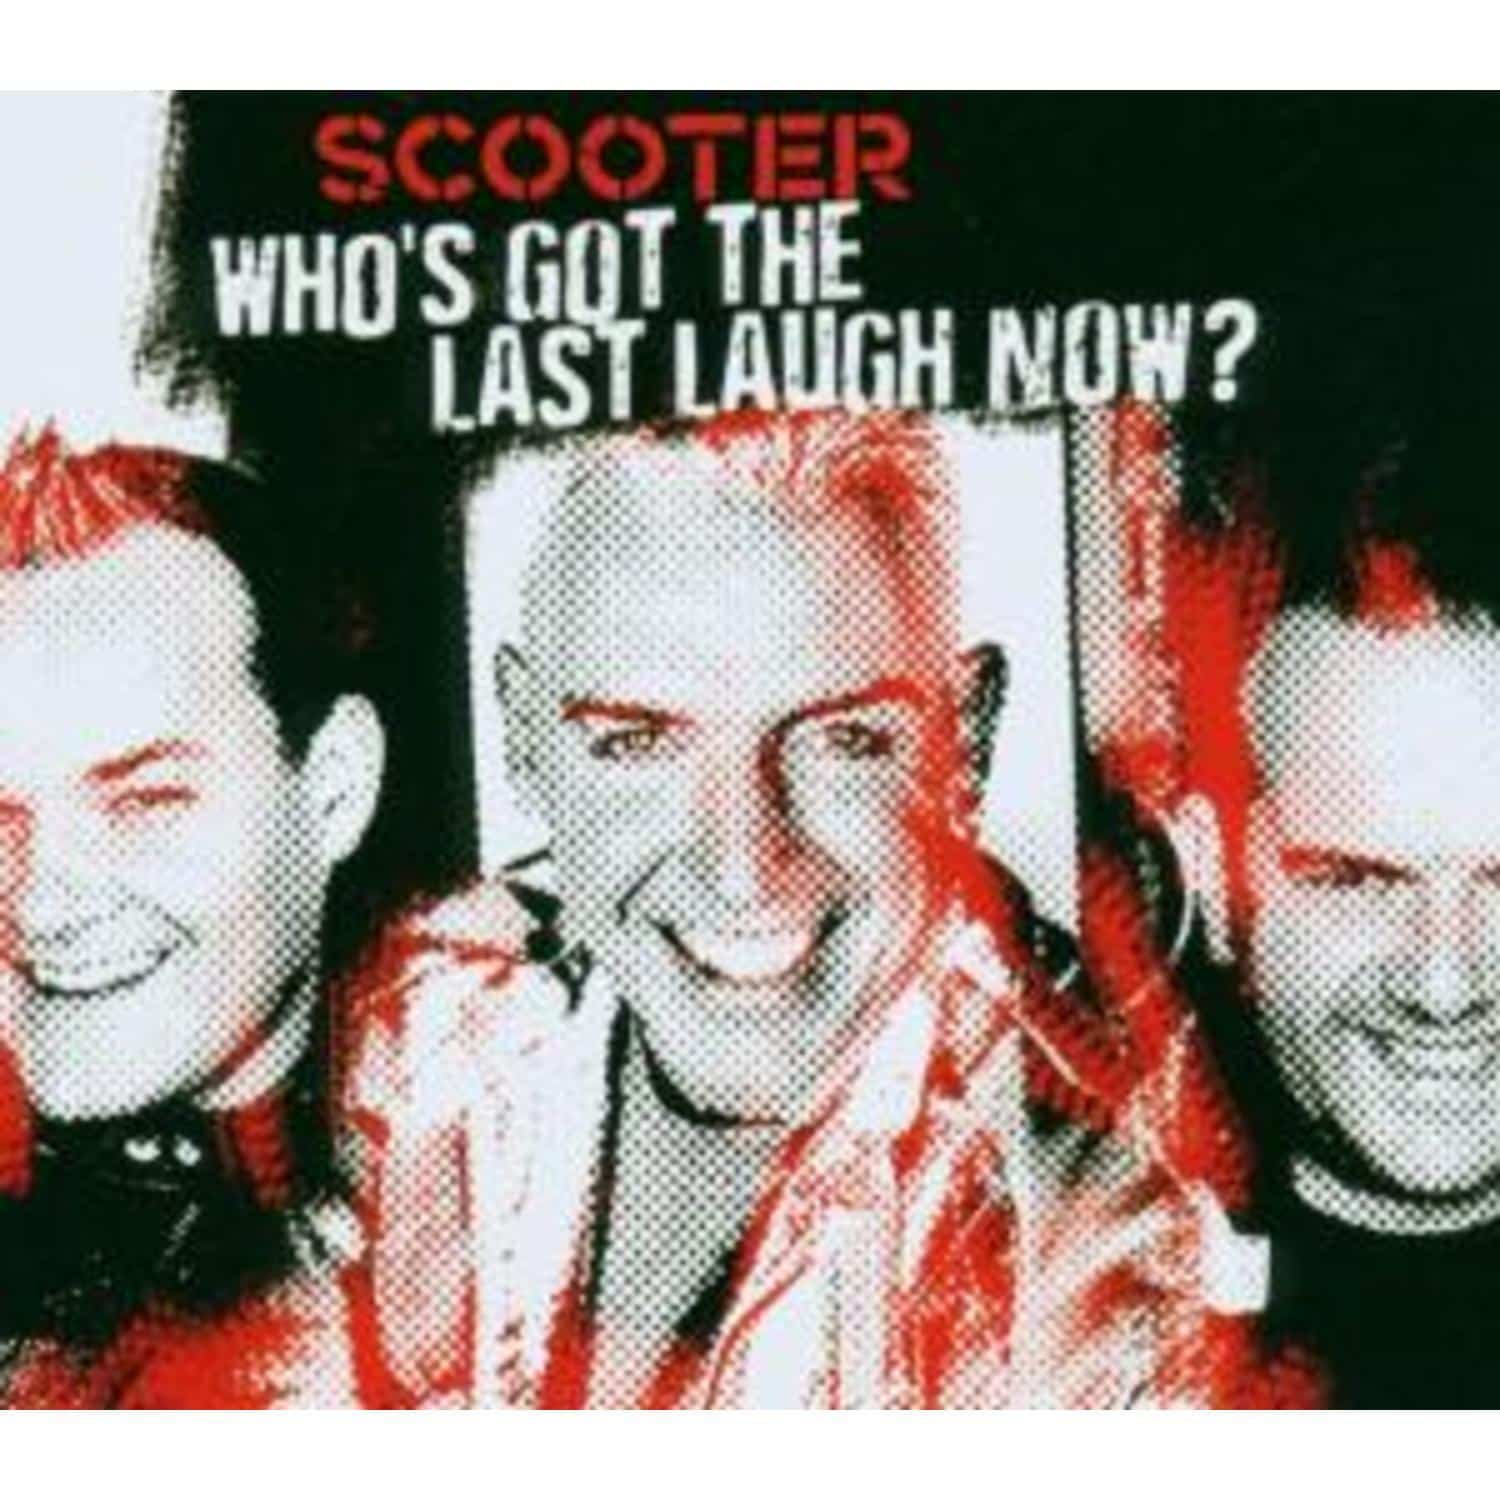 Scooter - WHO S GOT THE LAST LAUGH NOW? 